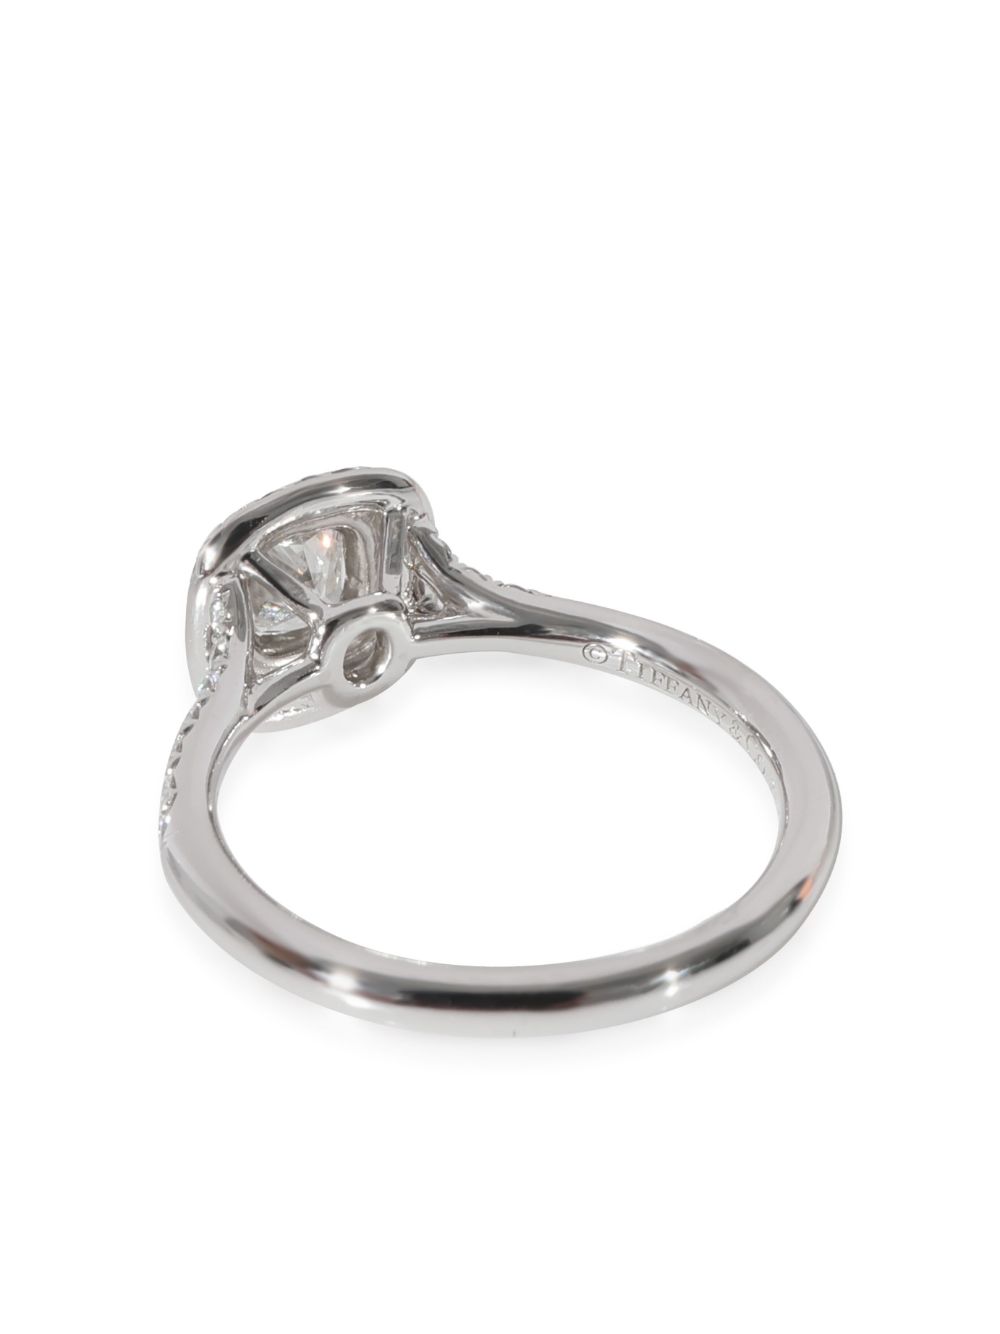 Tiffany & Co. Pre-Owned Platinum Soleste Diamond Engagement Ring - Farfetch